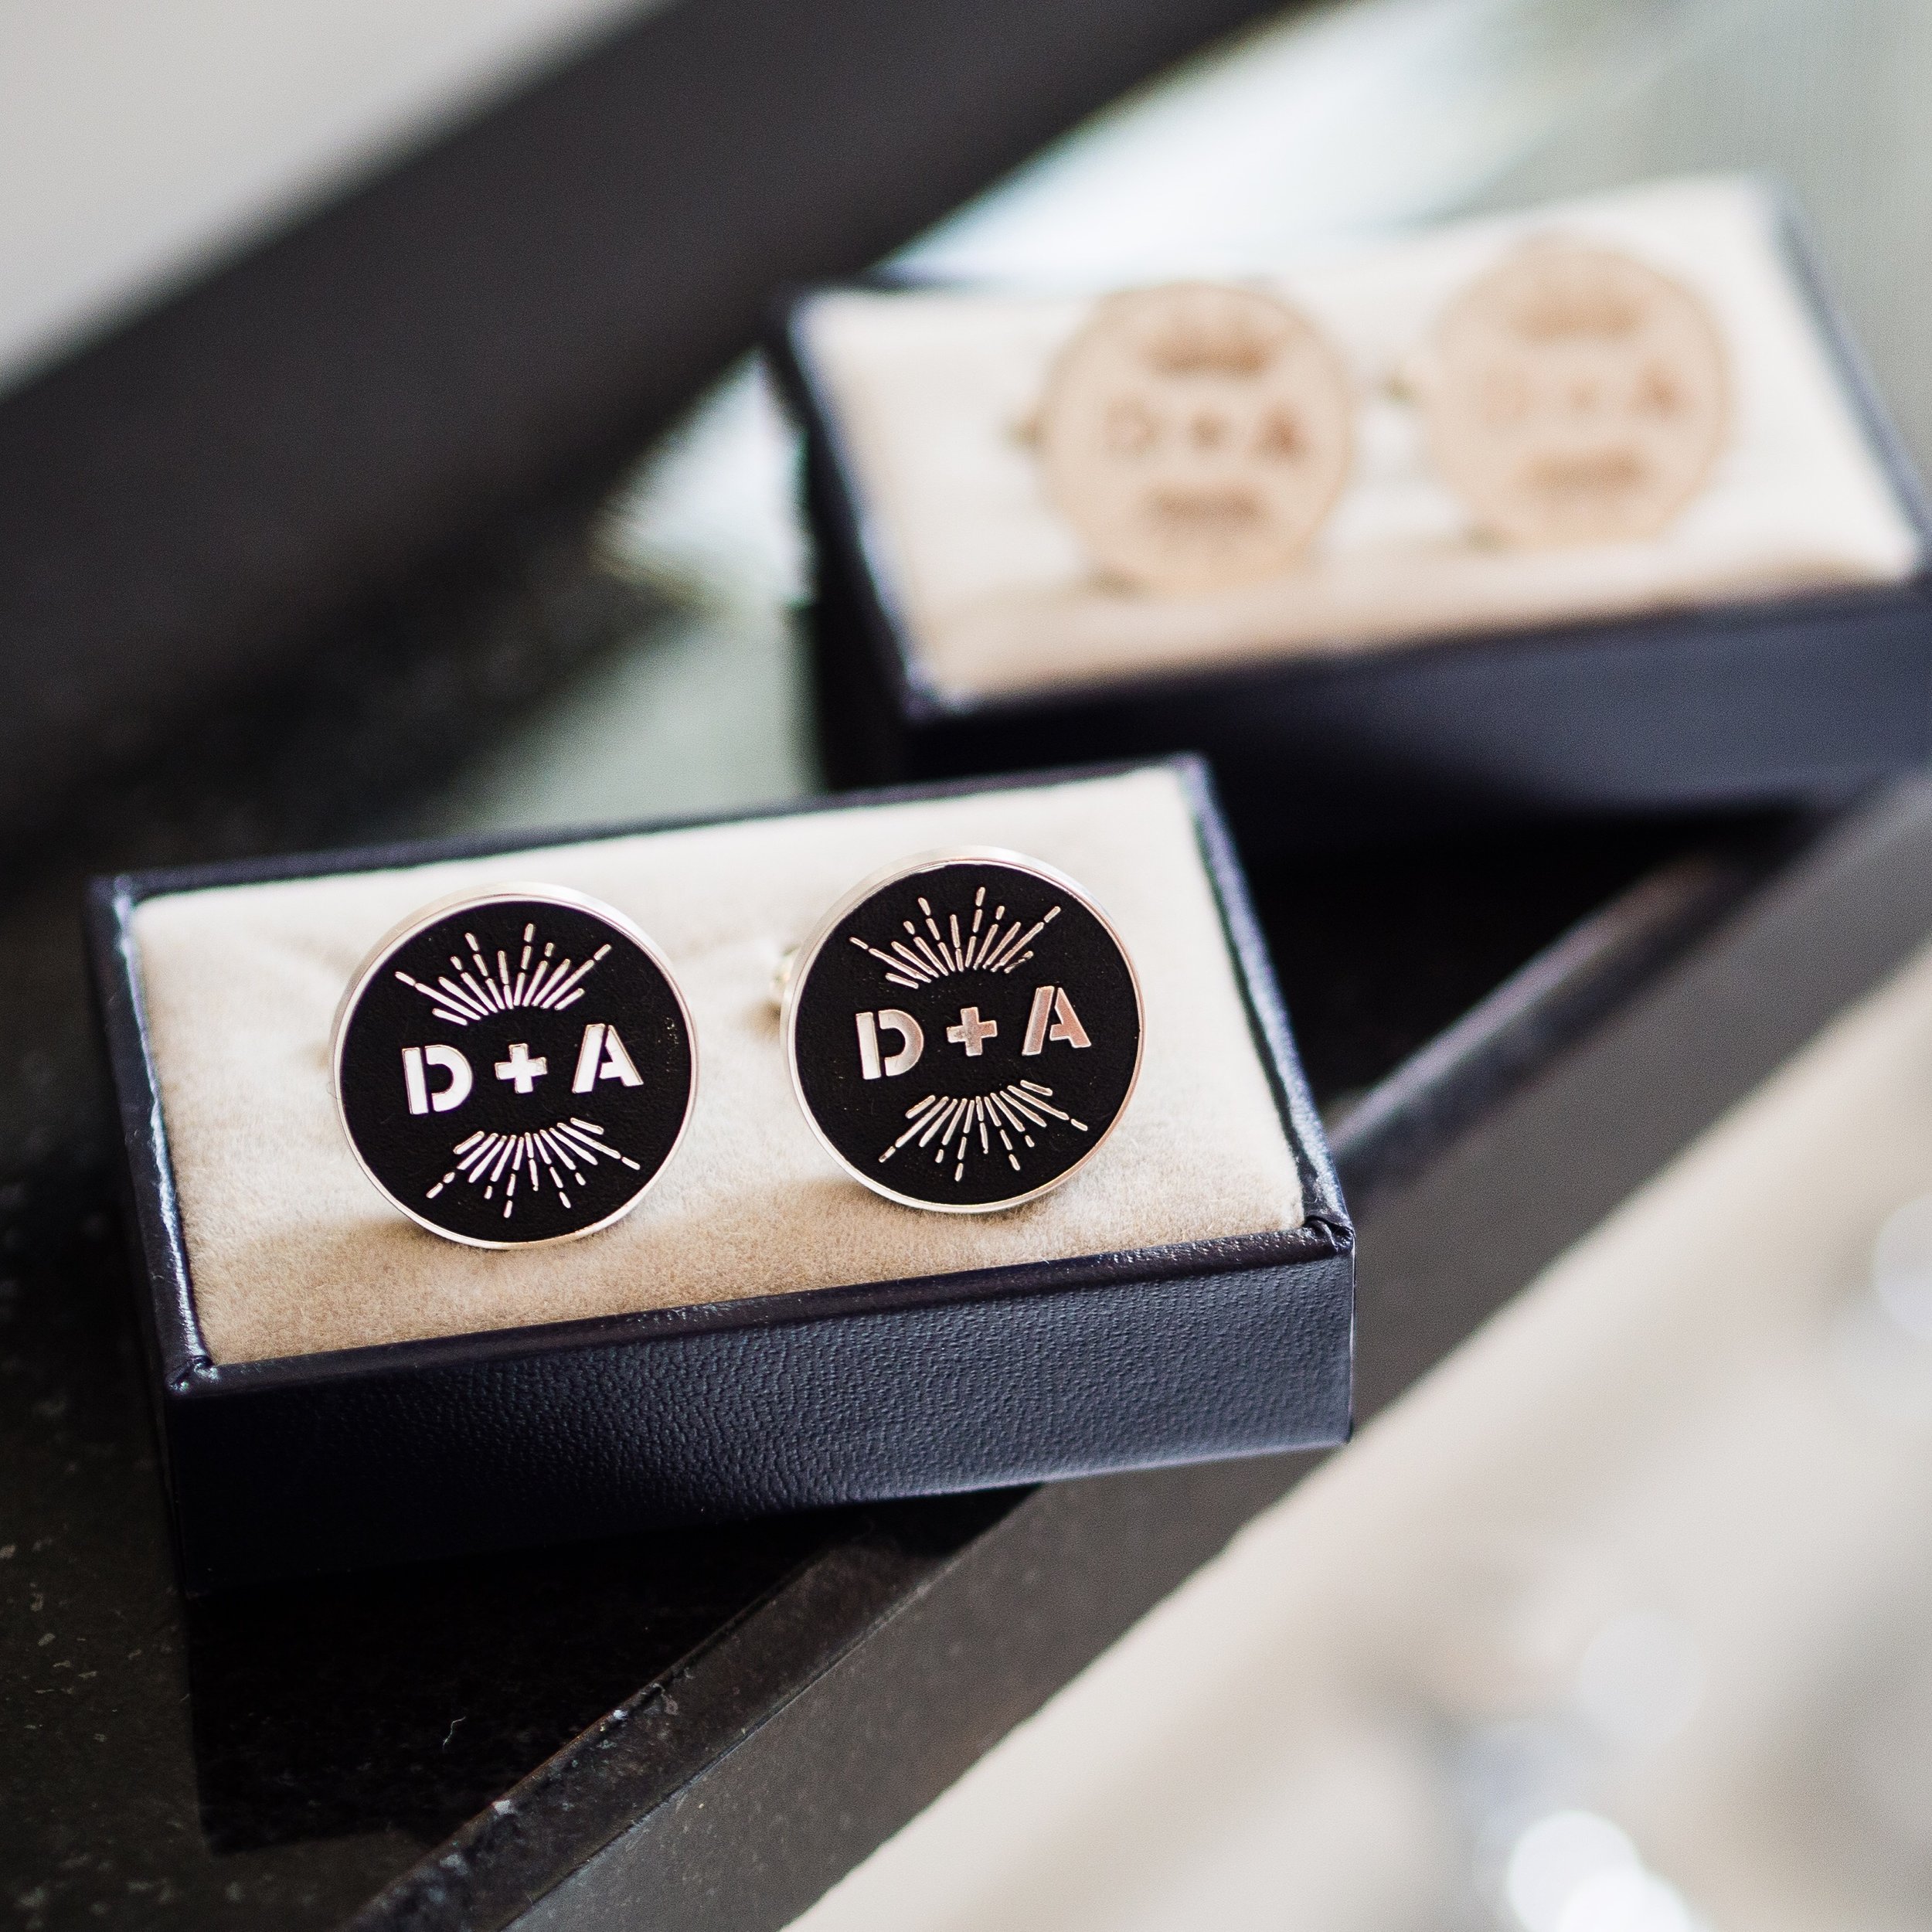  We were super excited to learn that Daryl and Amir had cufflinks made using our D+A logo!! 